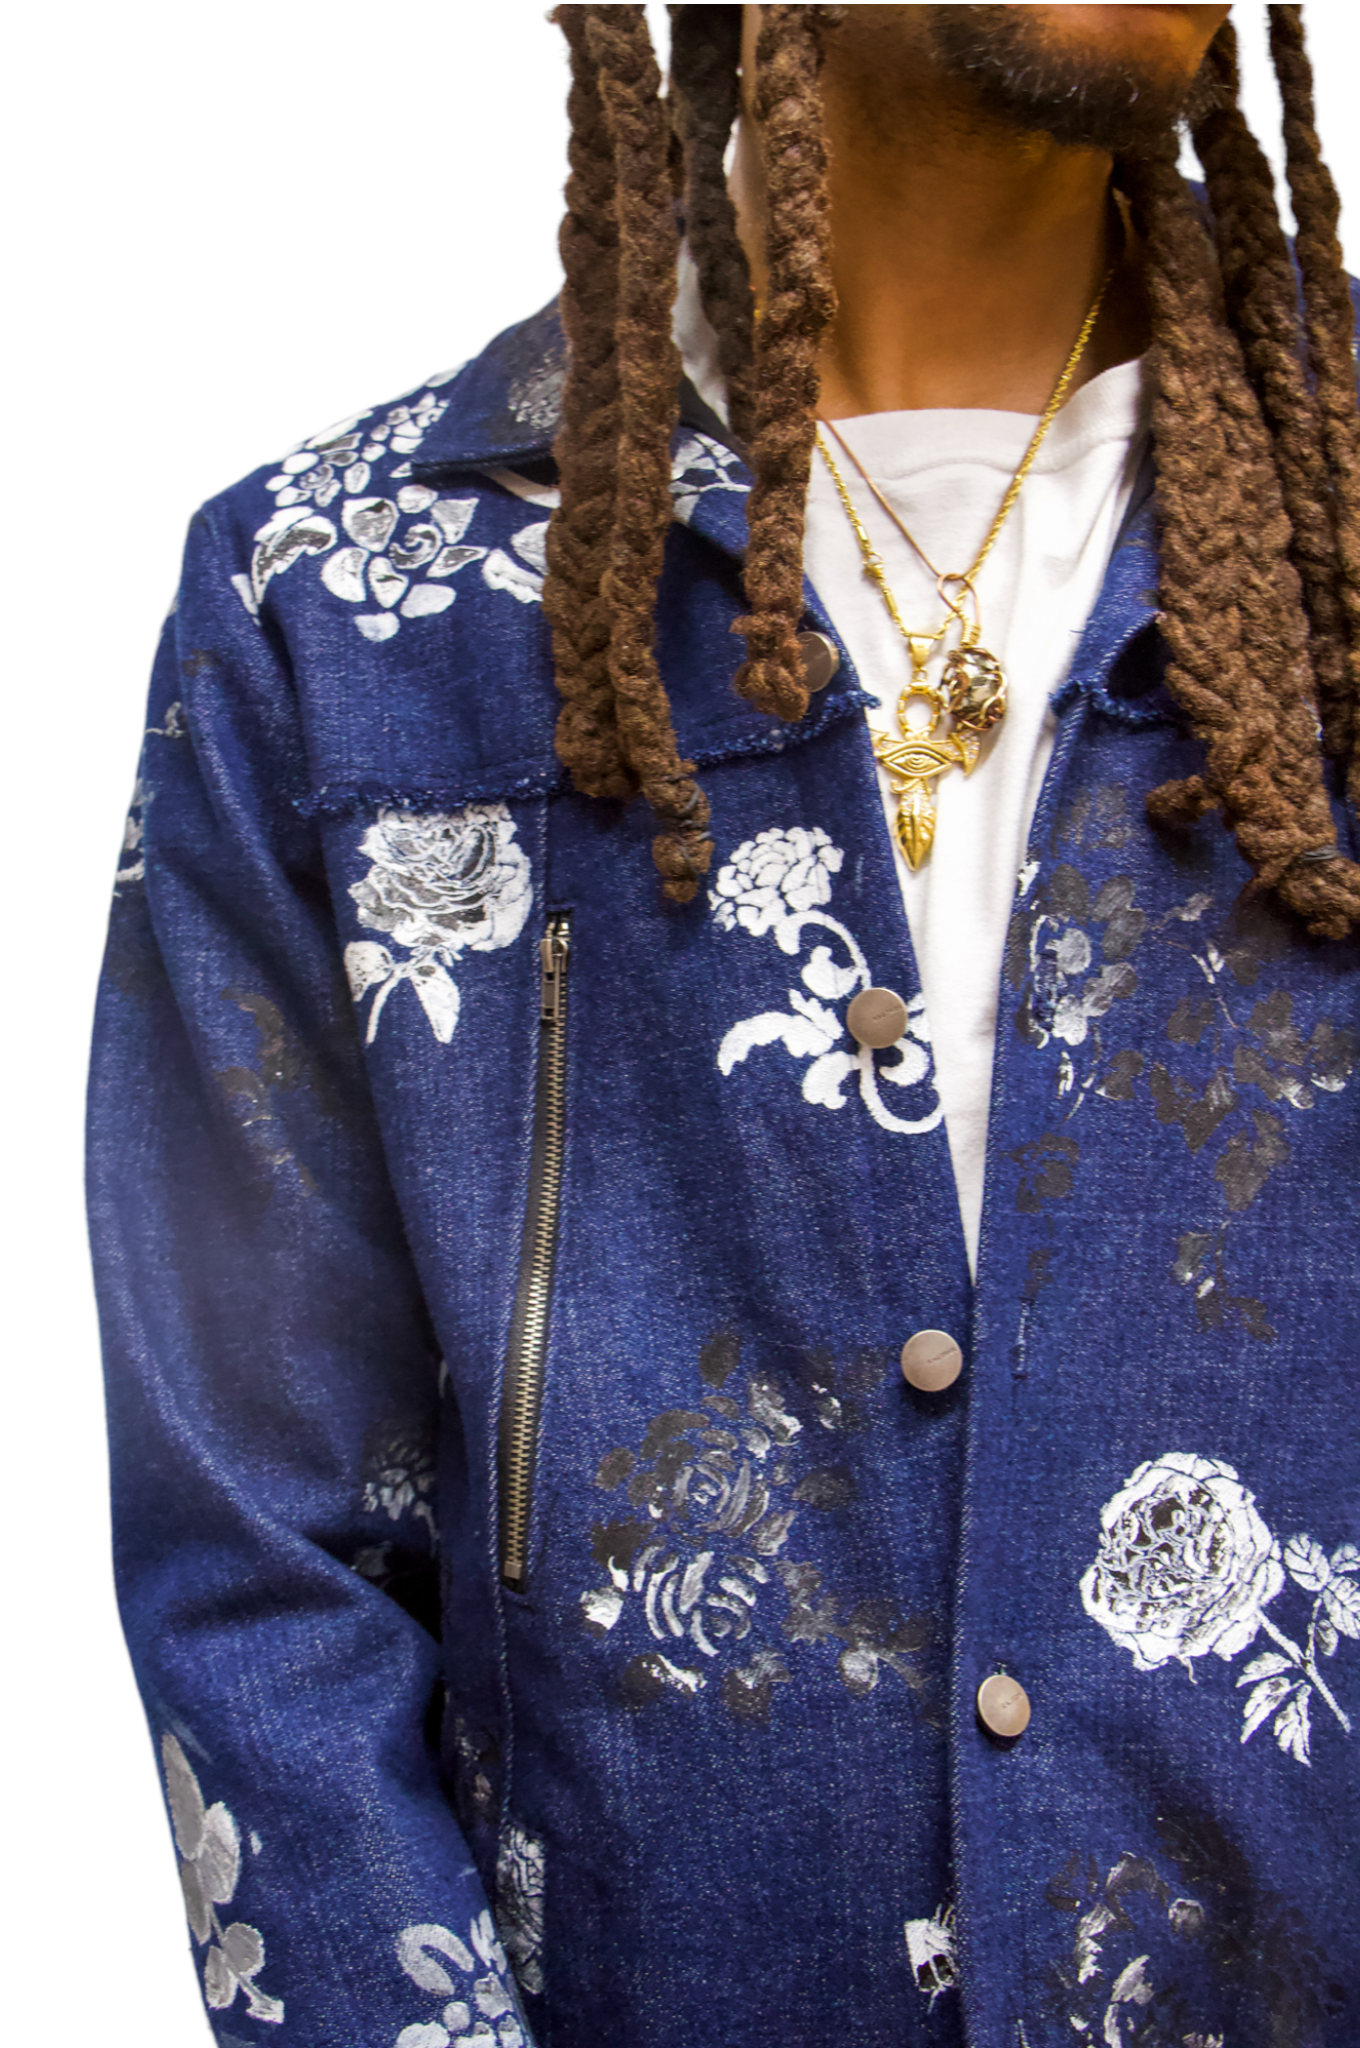 The Cultivate Denim Jacket - Ragtribe Ethical Clothing & Productions, LLC